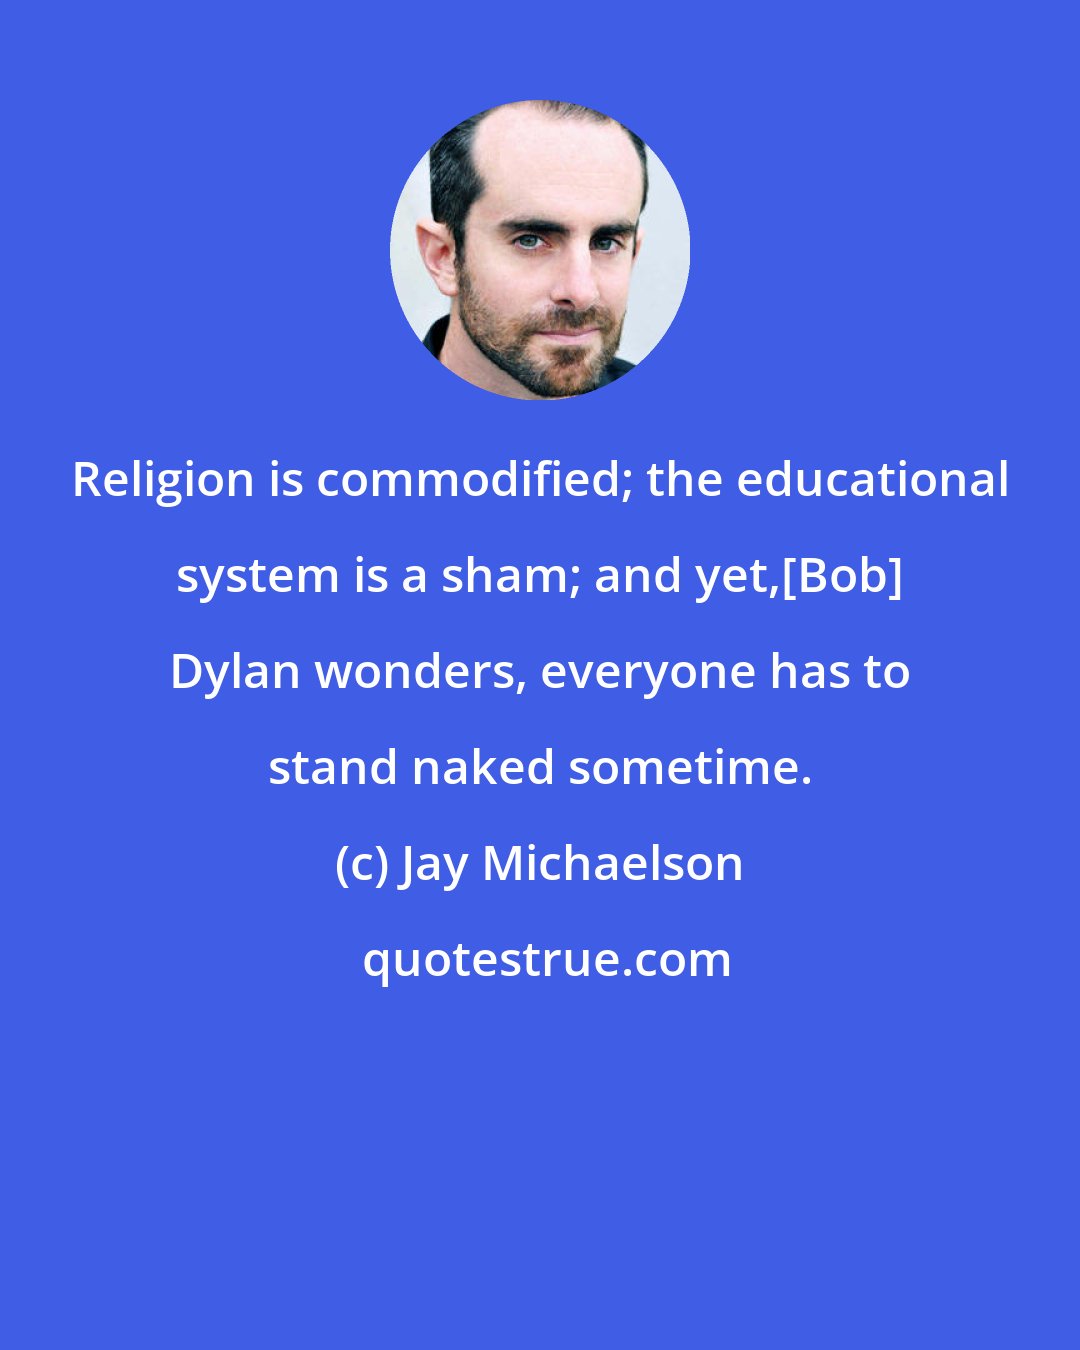 Jay Michaelson: Religion is commodified; the educational system is a sham; and yet,[Bob] Dylan wonders, everyone has to stand naked sometime.